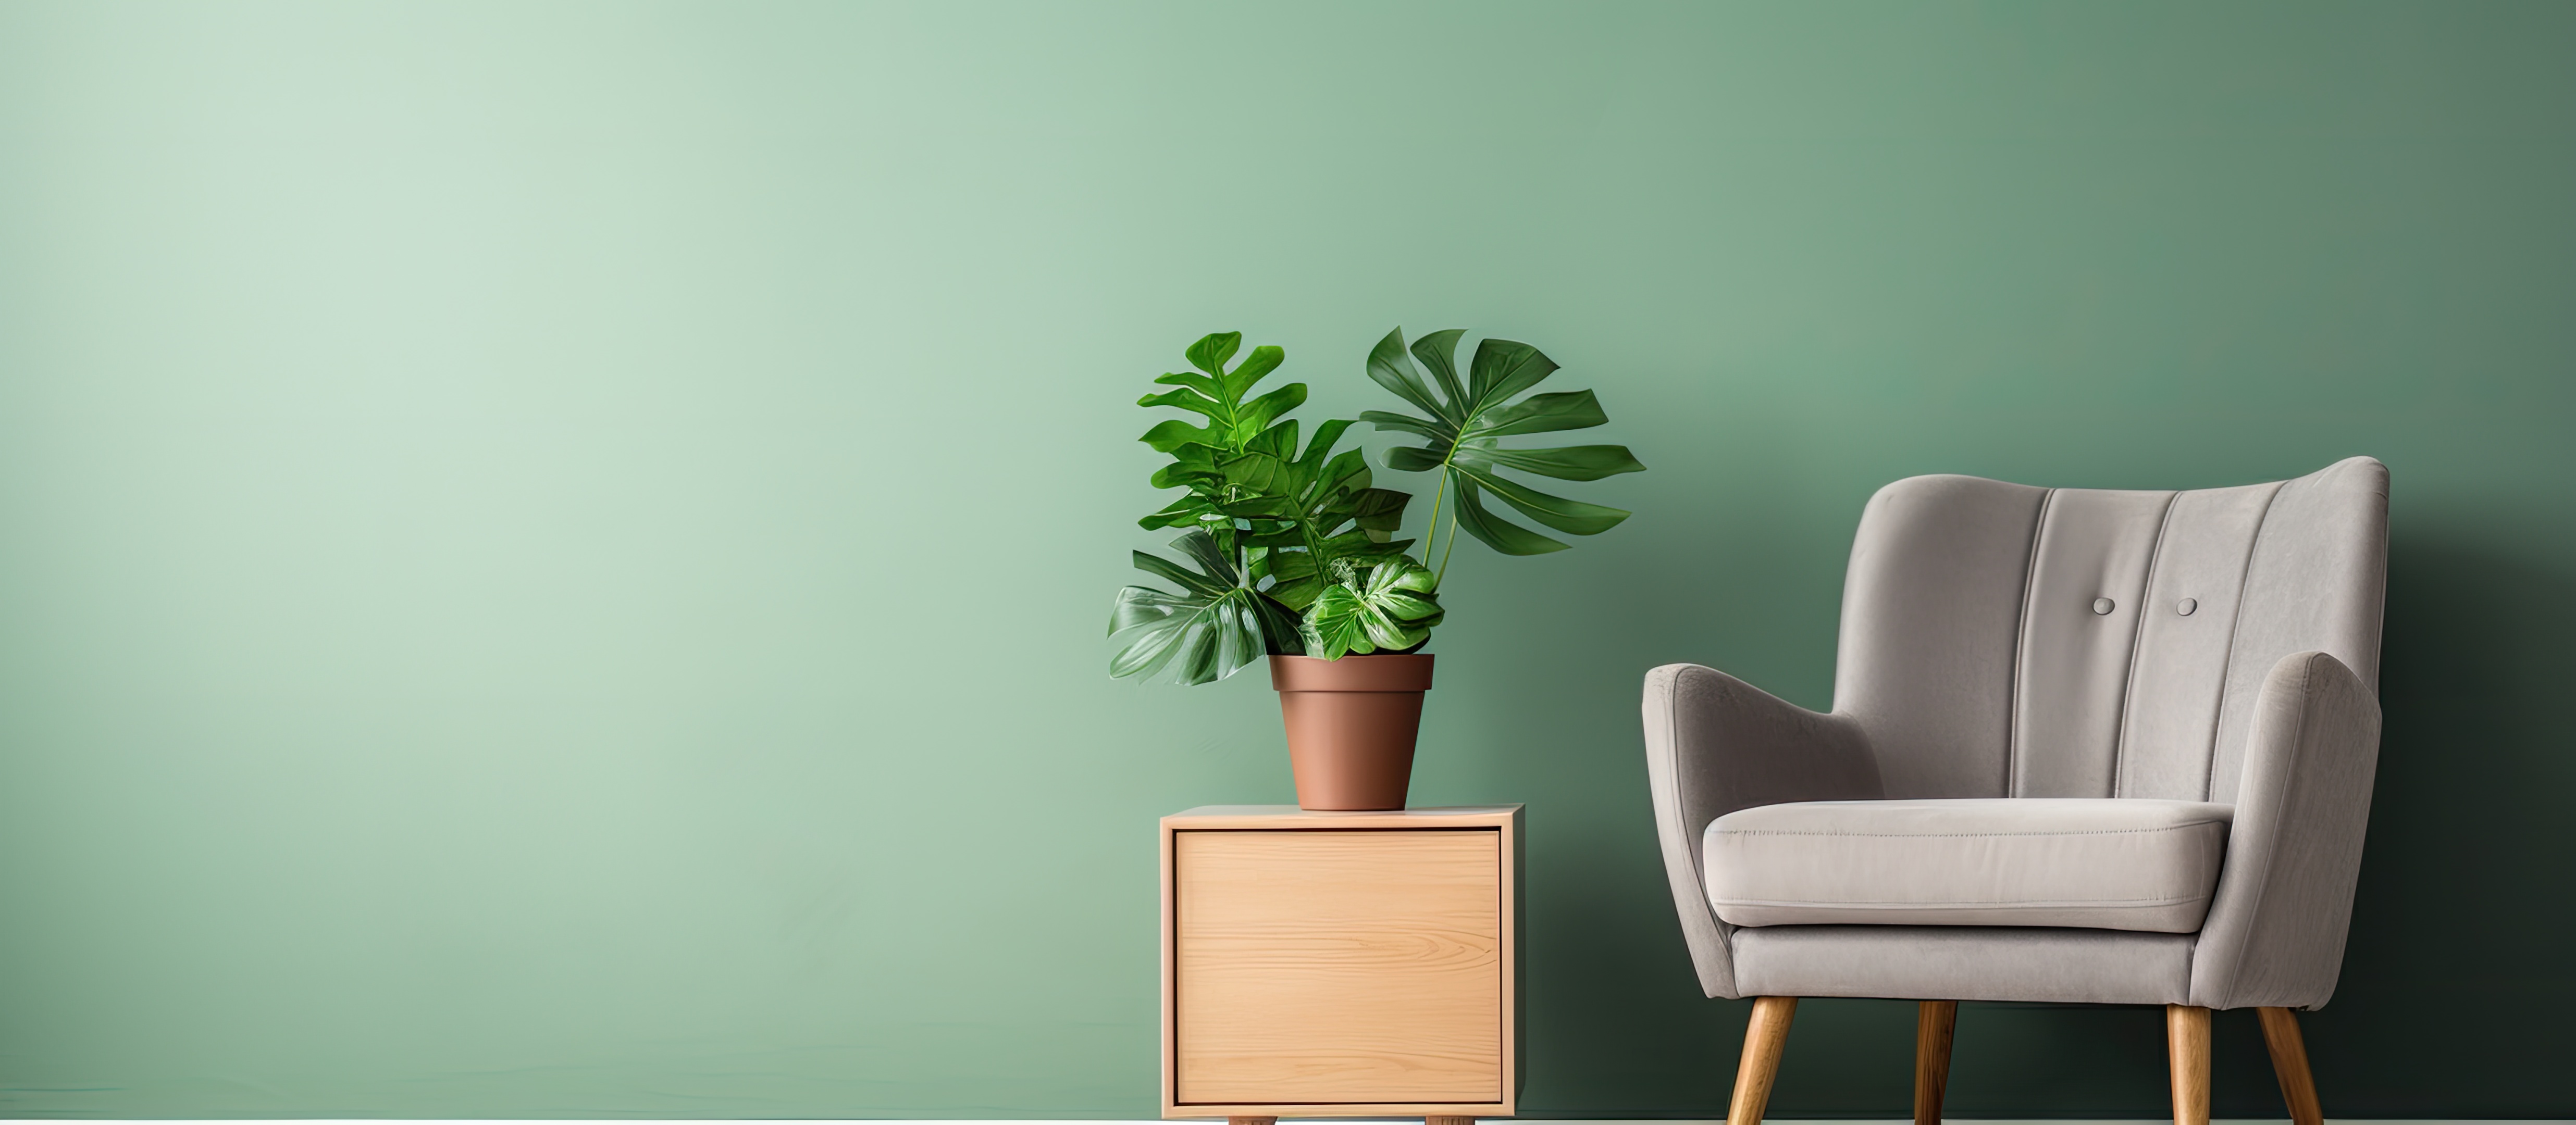 Philodendron Plant: An elegant and flowing houseplant with heart-shaped leaves, perfect for adding a touch of jungle-inspired charm to your bedroom décor.